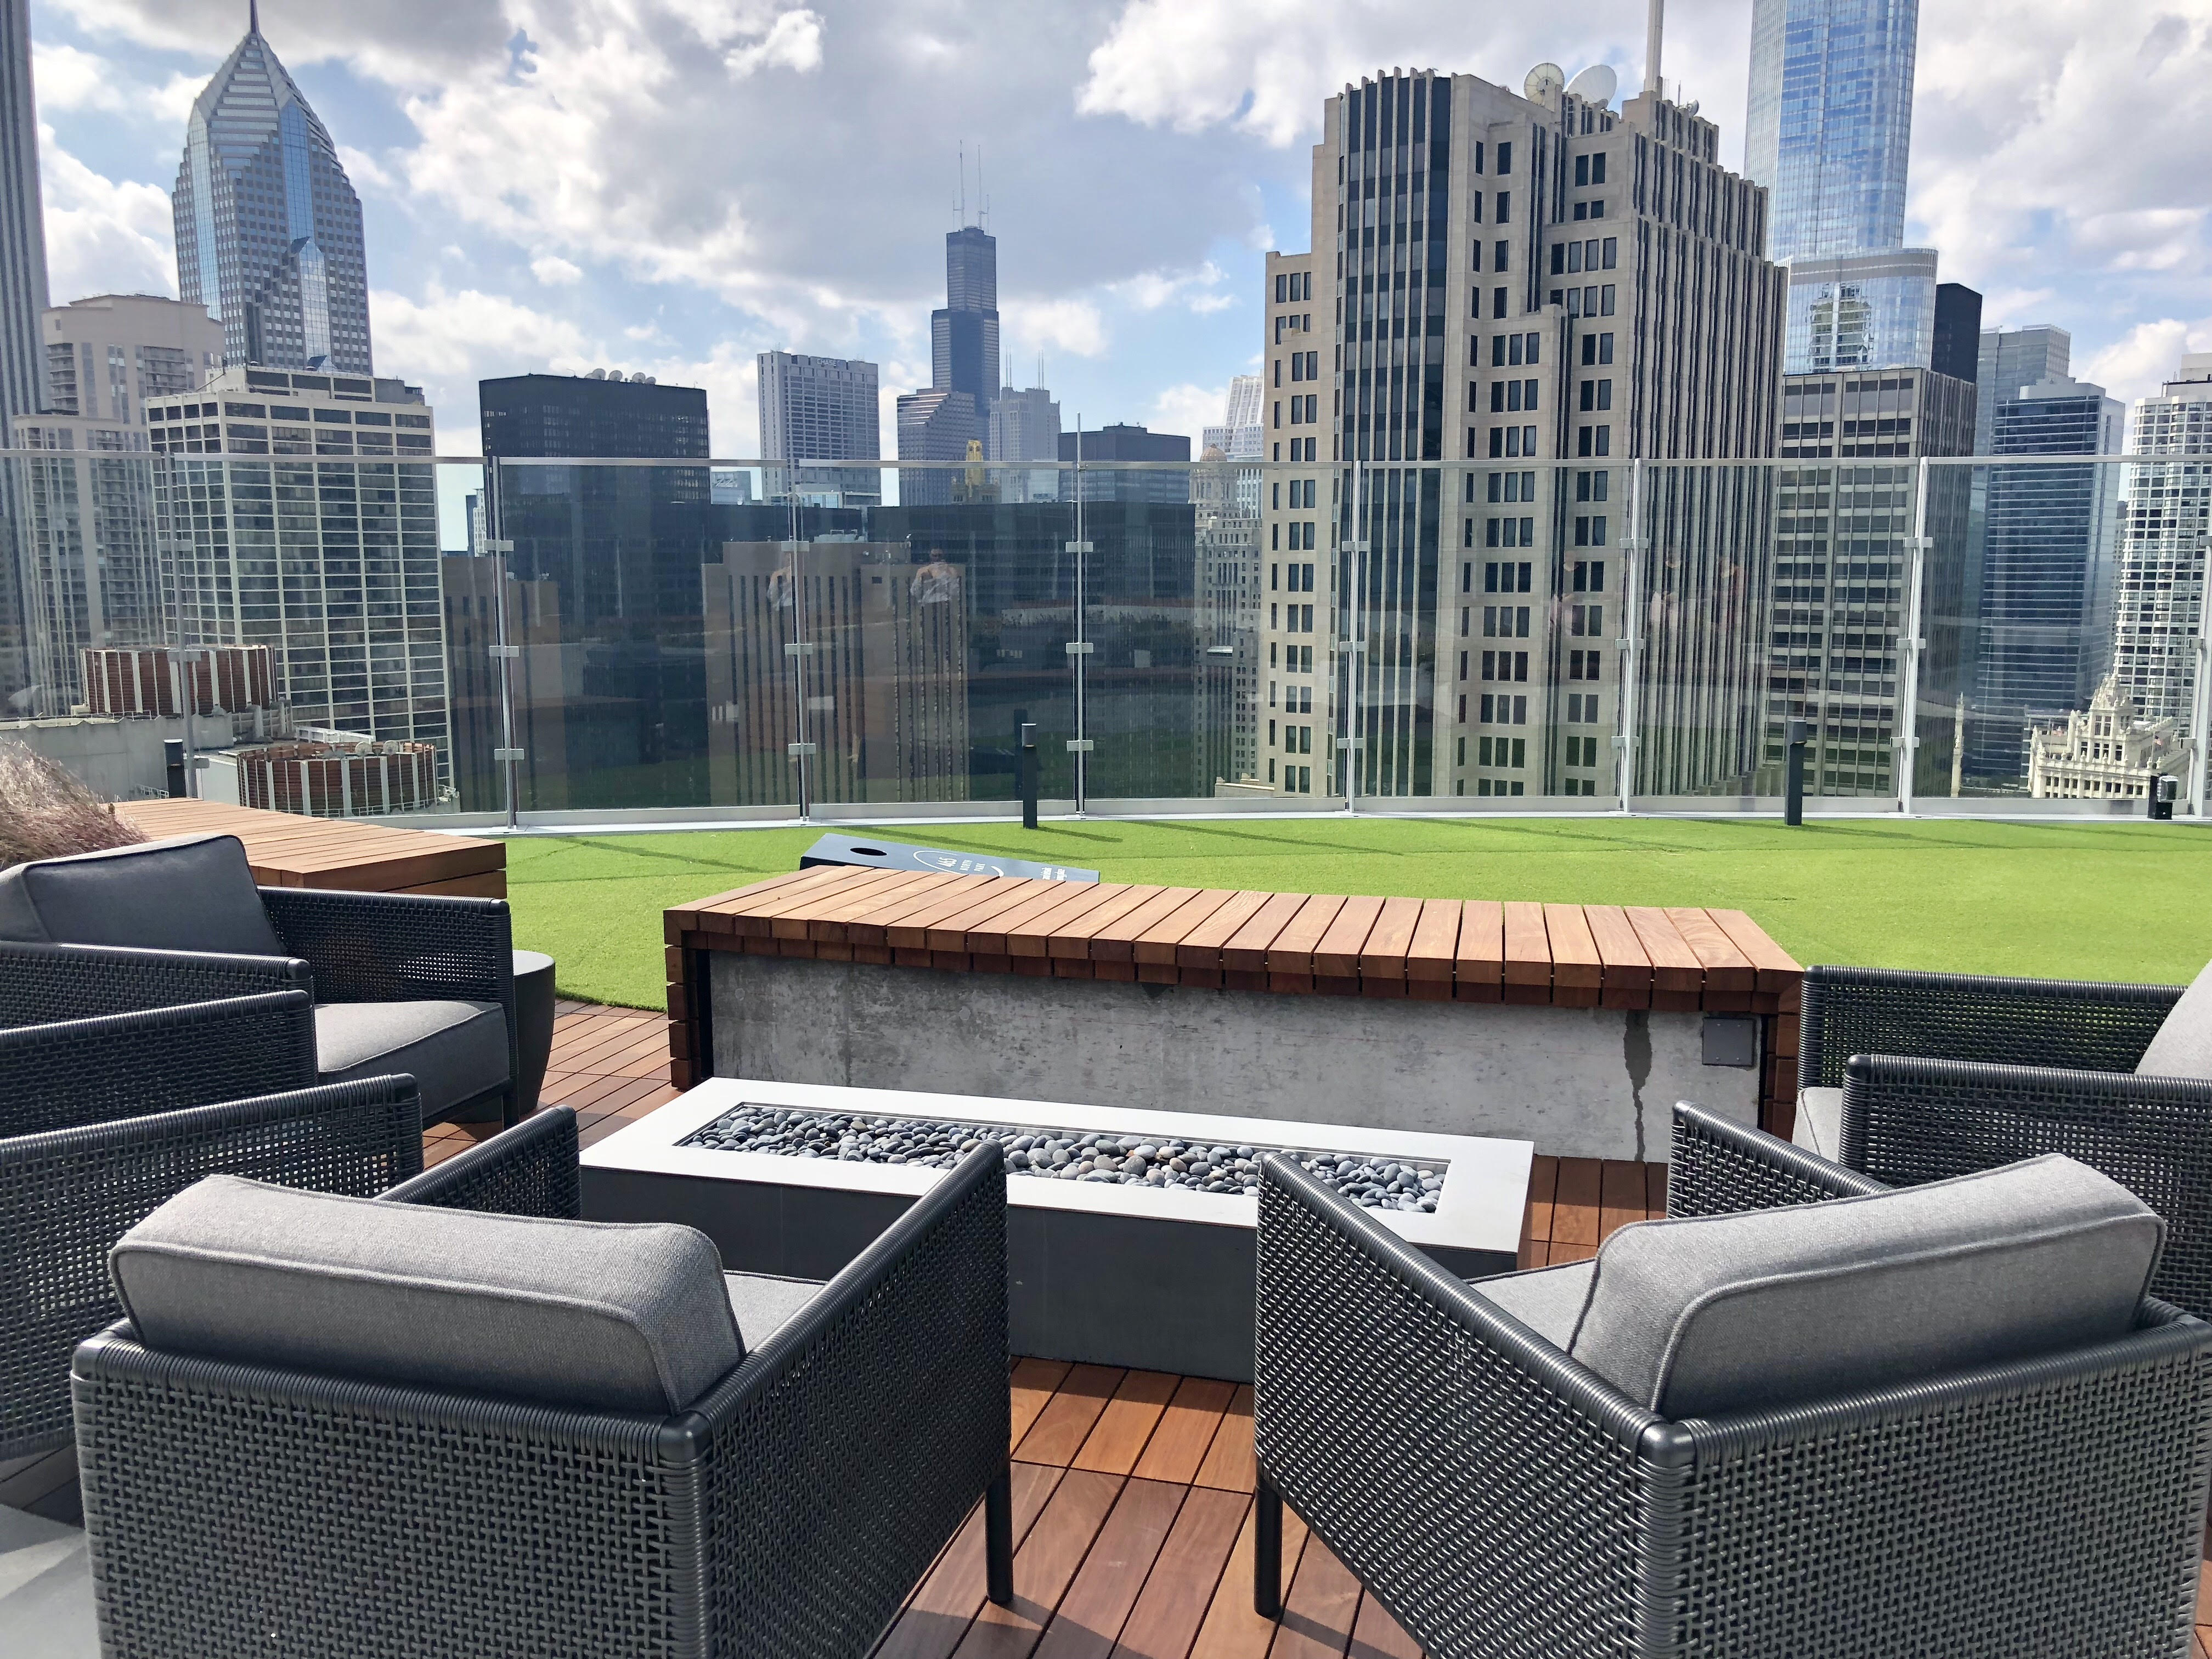 Looking for luxury apartments for rent near Streeterville?